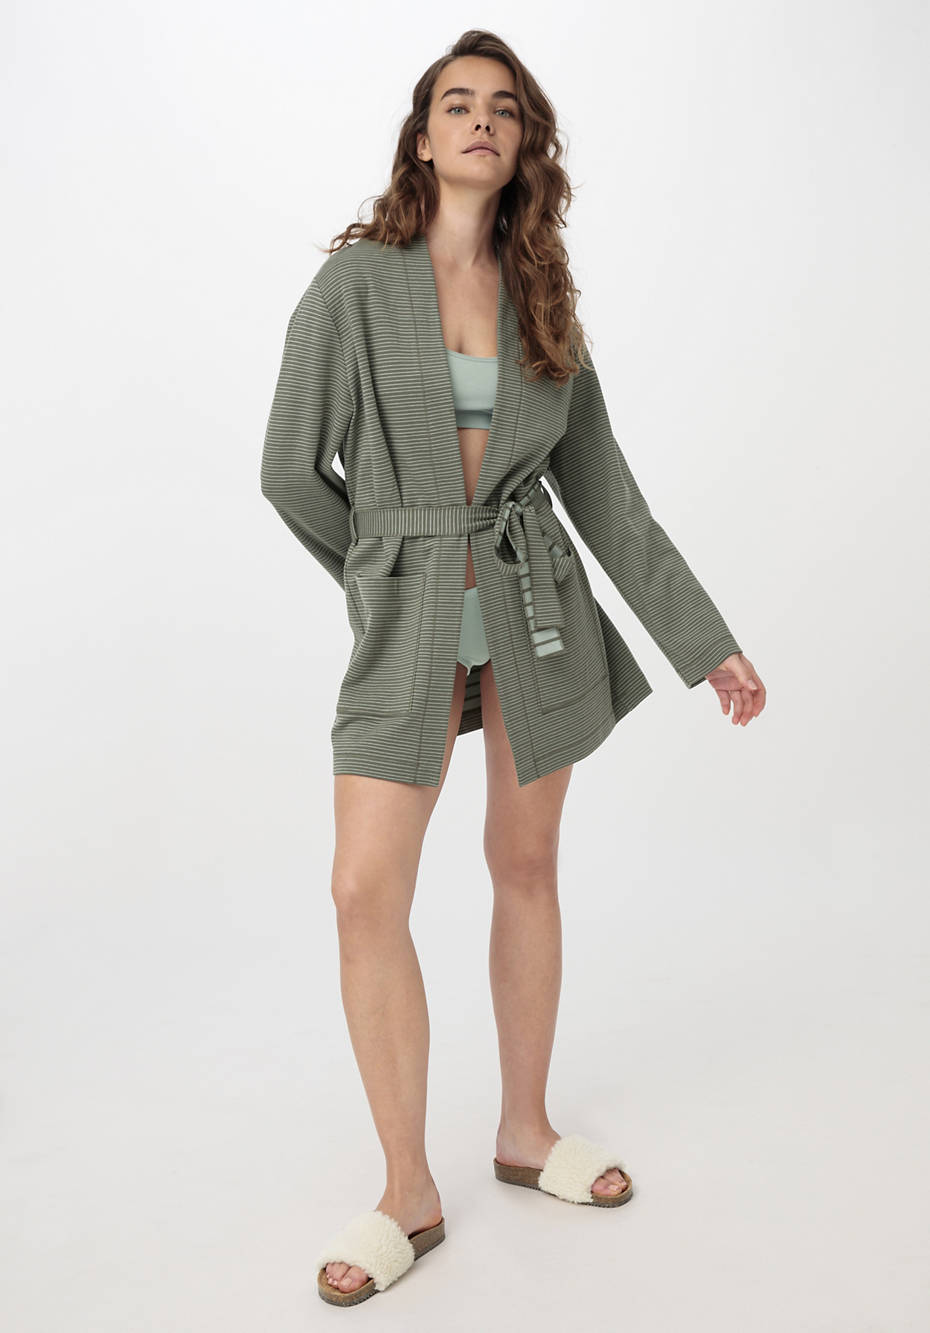 Dressing gown made from pure organic cotton